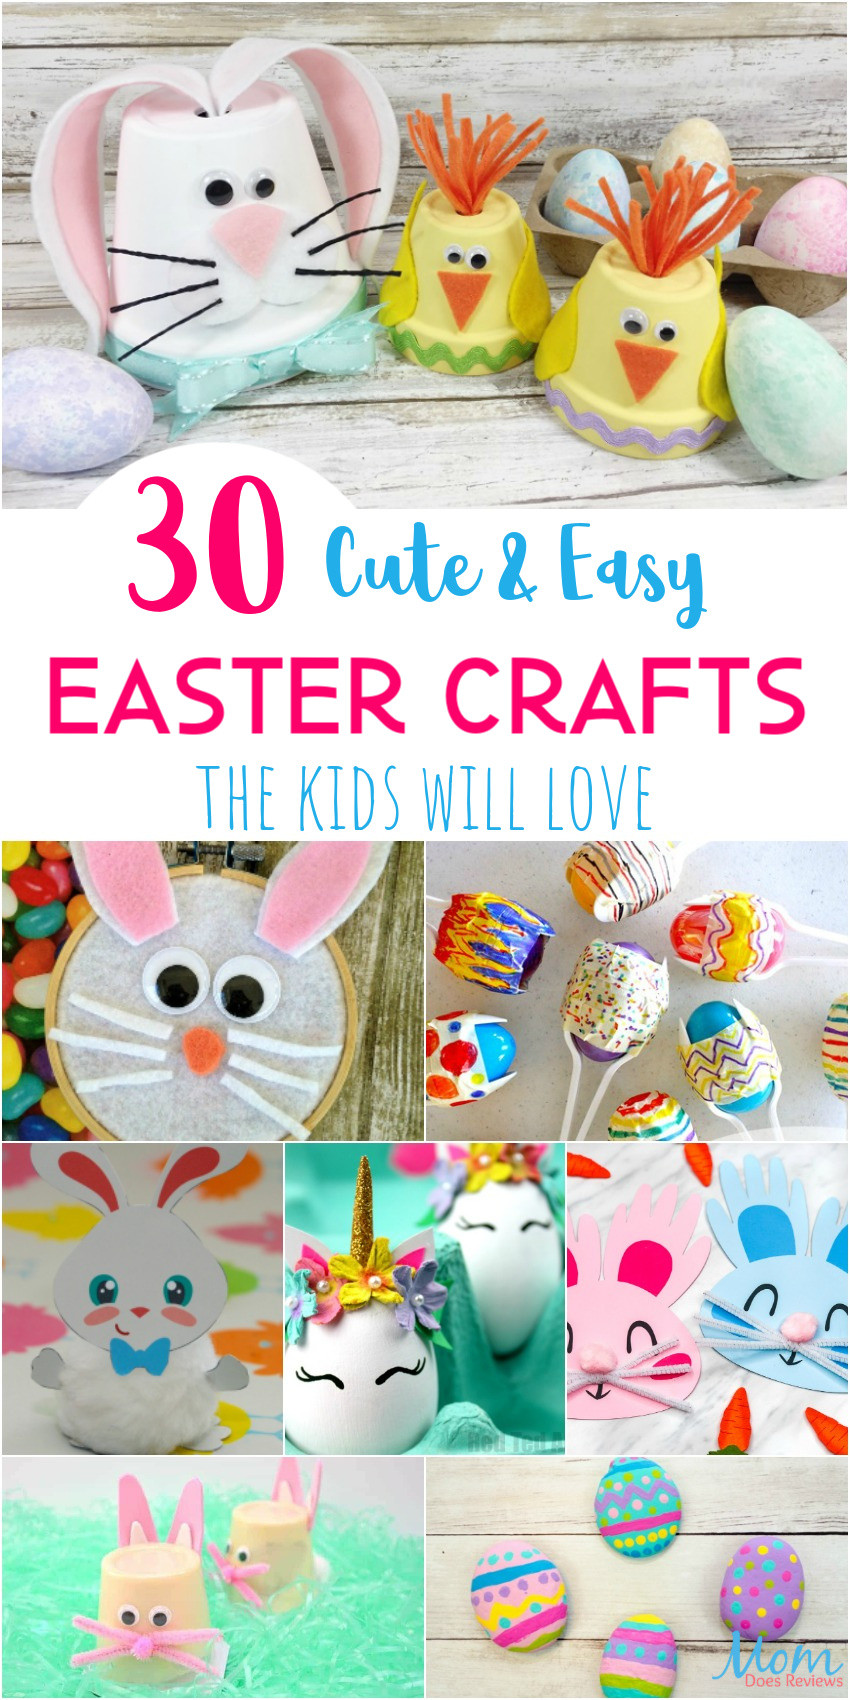 Cute Easter Ideas For Toddlers
 30 Cute & Easy Easter Crafts the Kids will Love